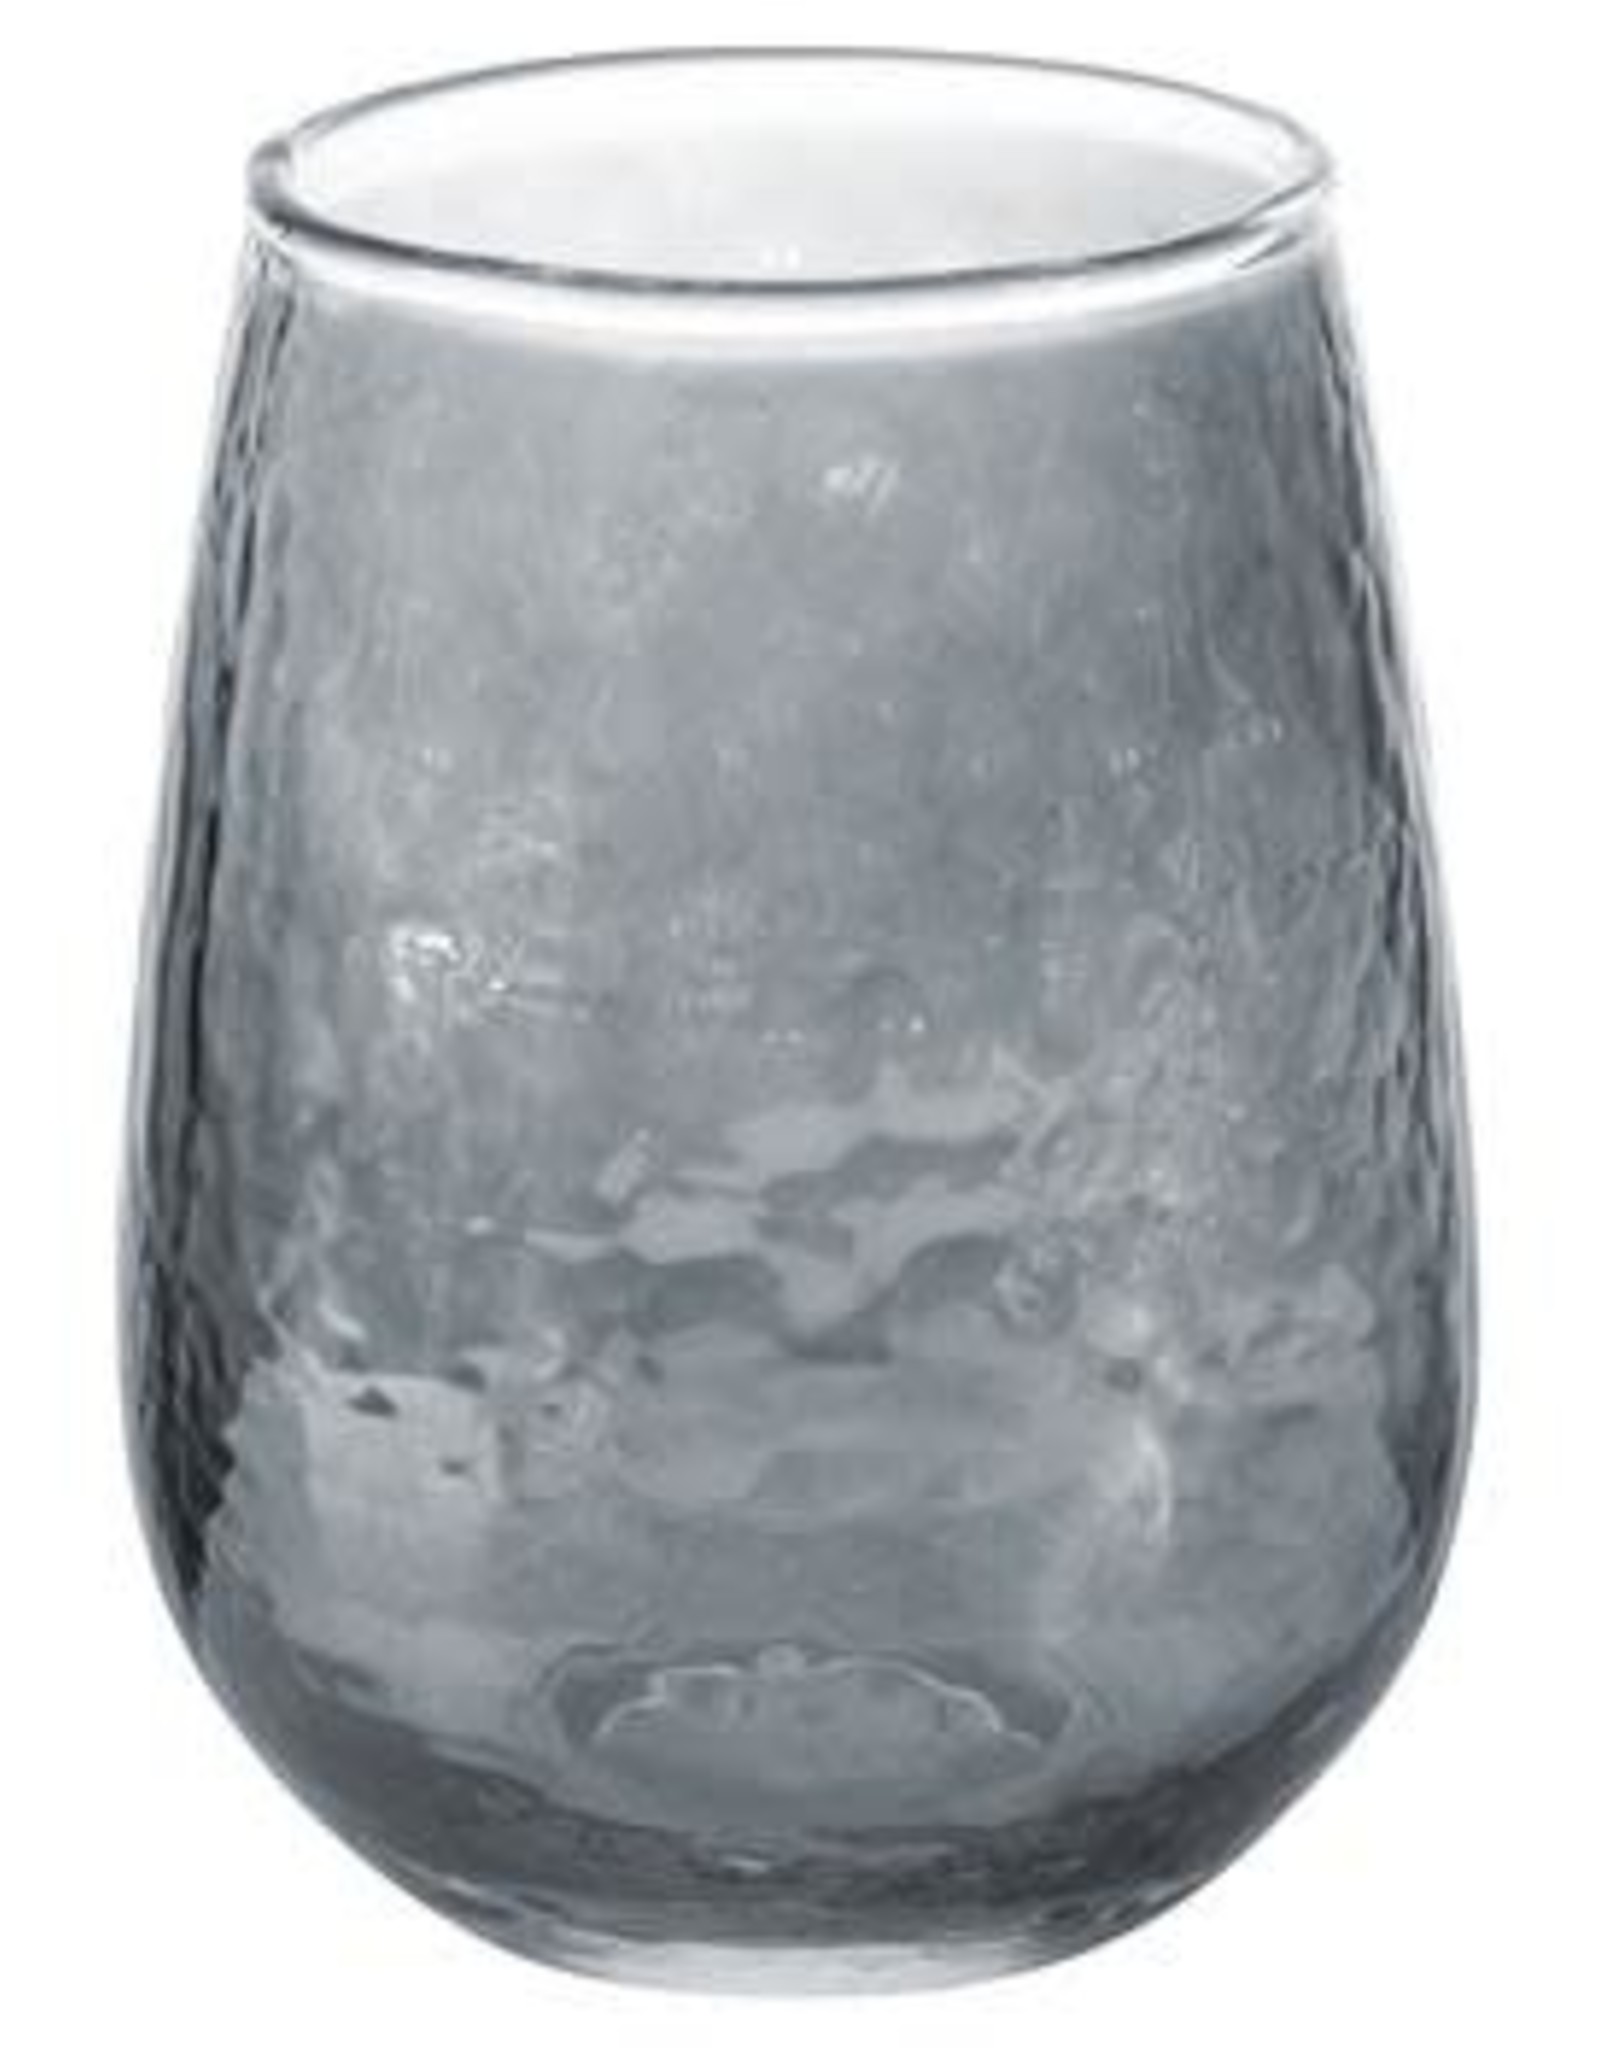 Luster Stemless Wine Glass Grey - Abigail's